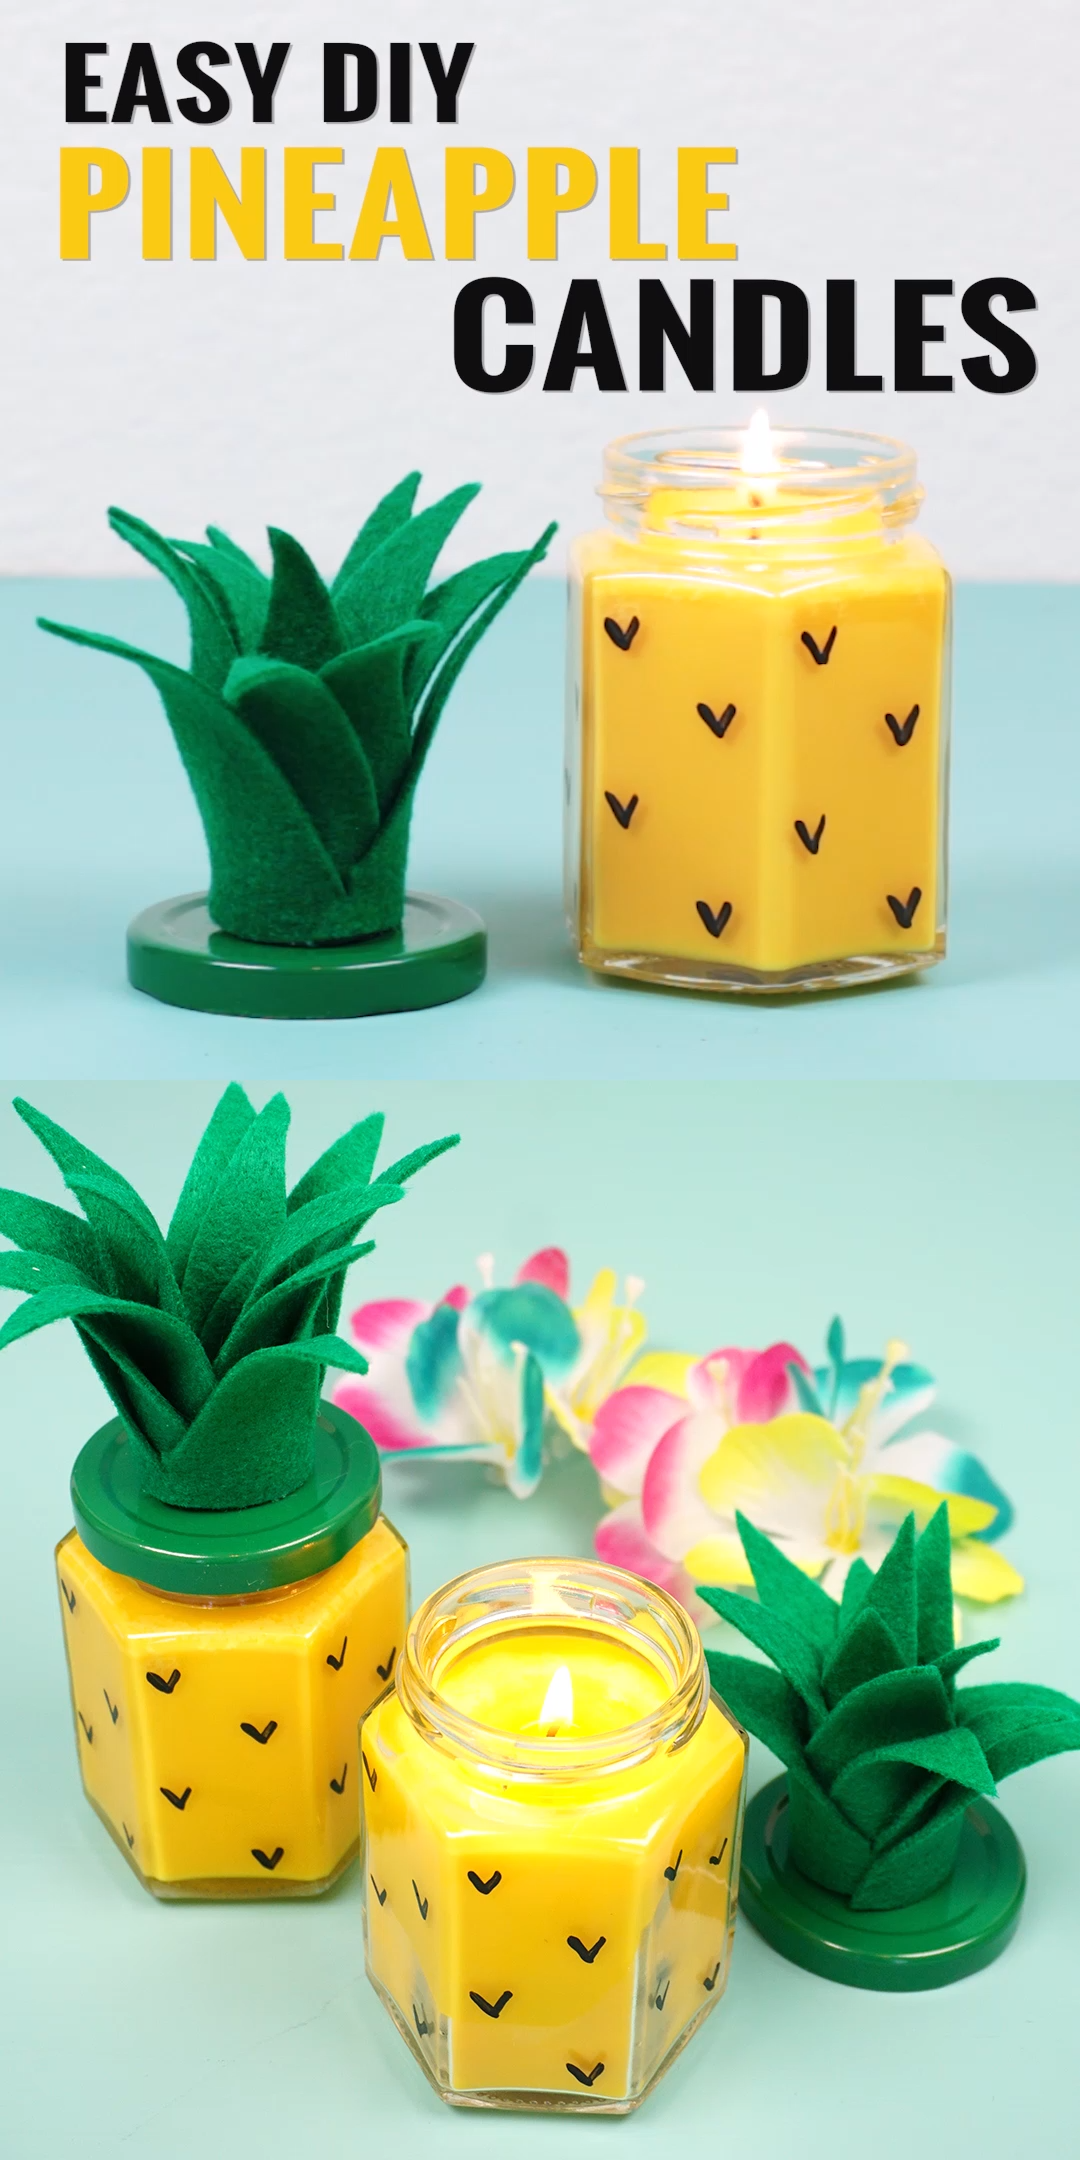 Easy DIY Pineapple Candles -   19 diy Gifts for friends ideas